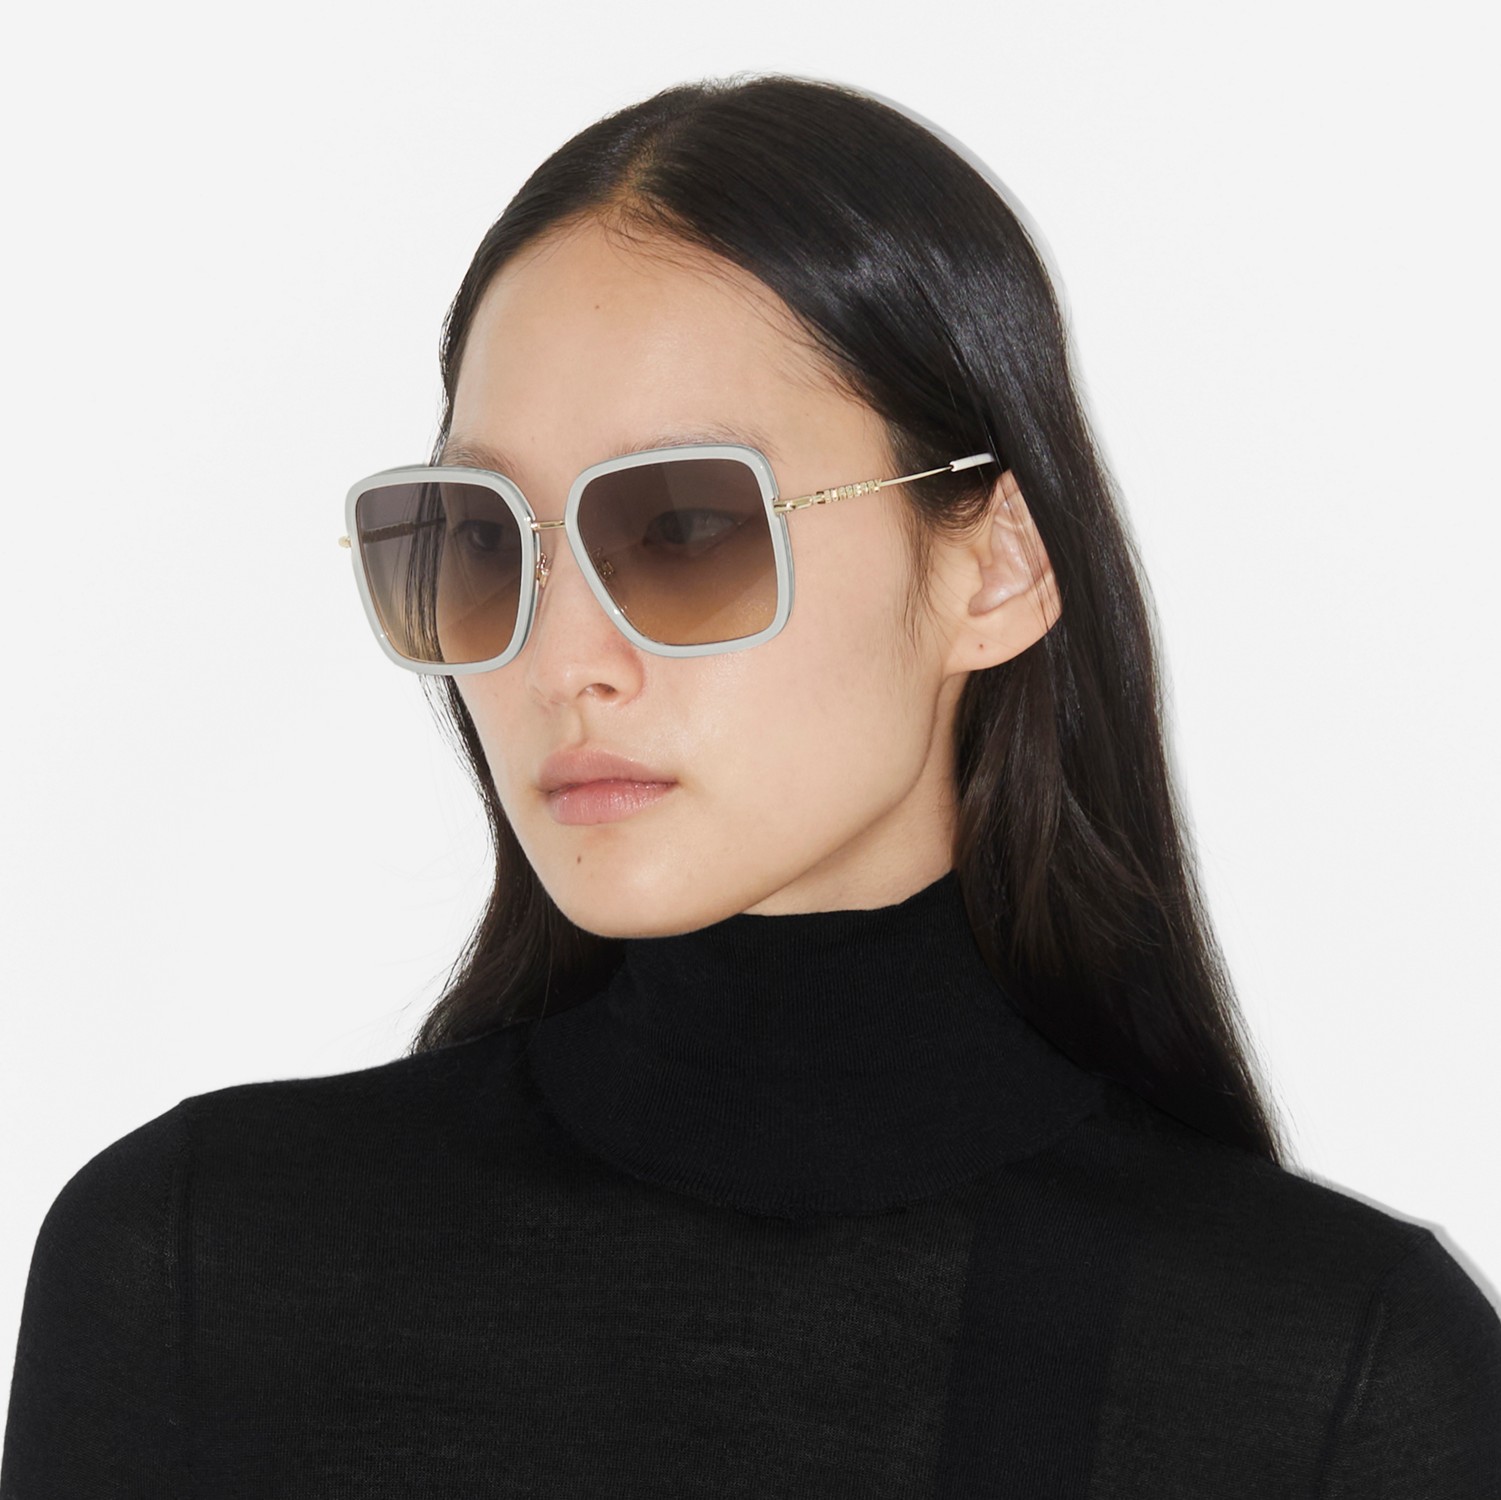 Oversized Square Frame Sunglasses in Ivory/light Gold - Women | Burberry® Official